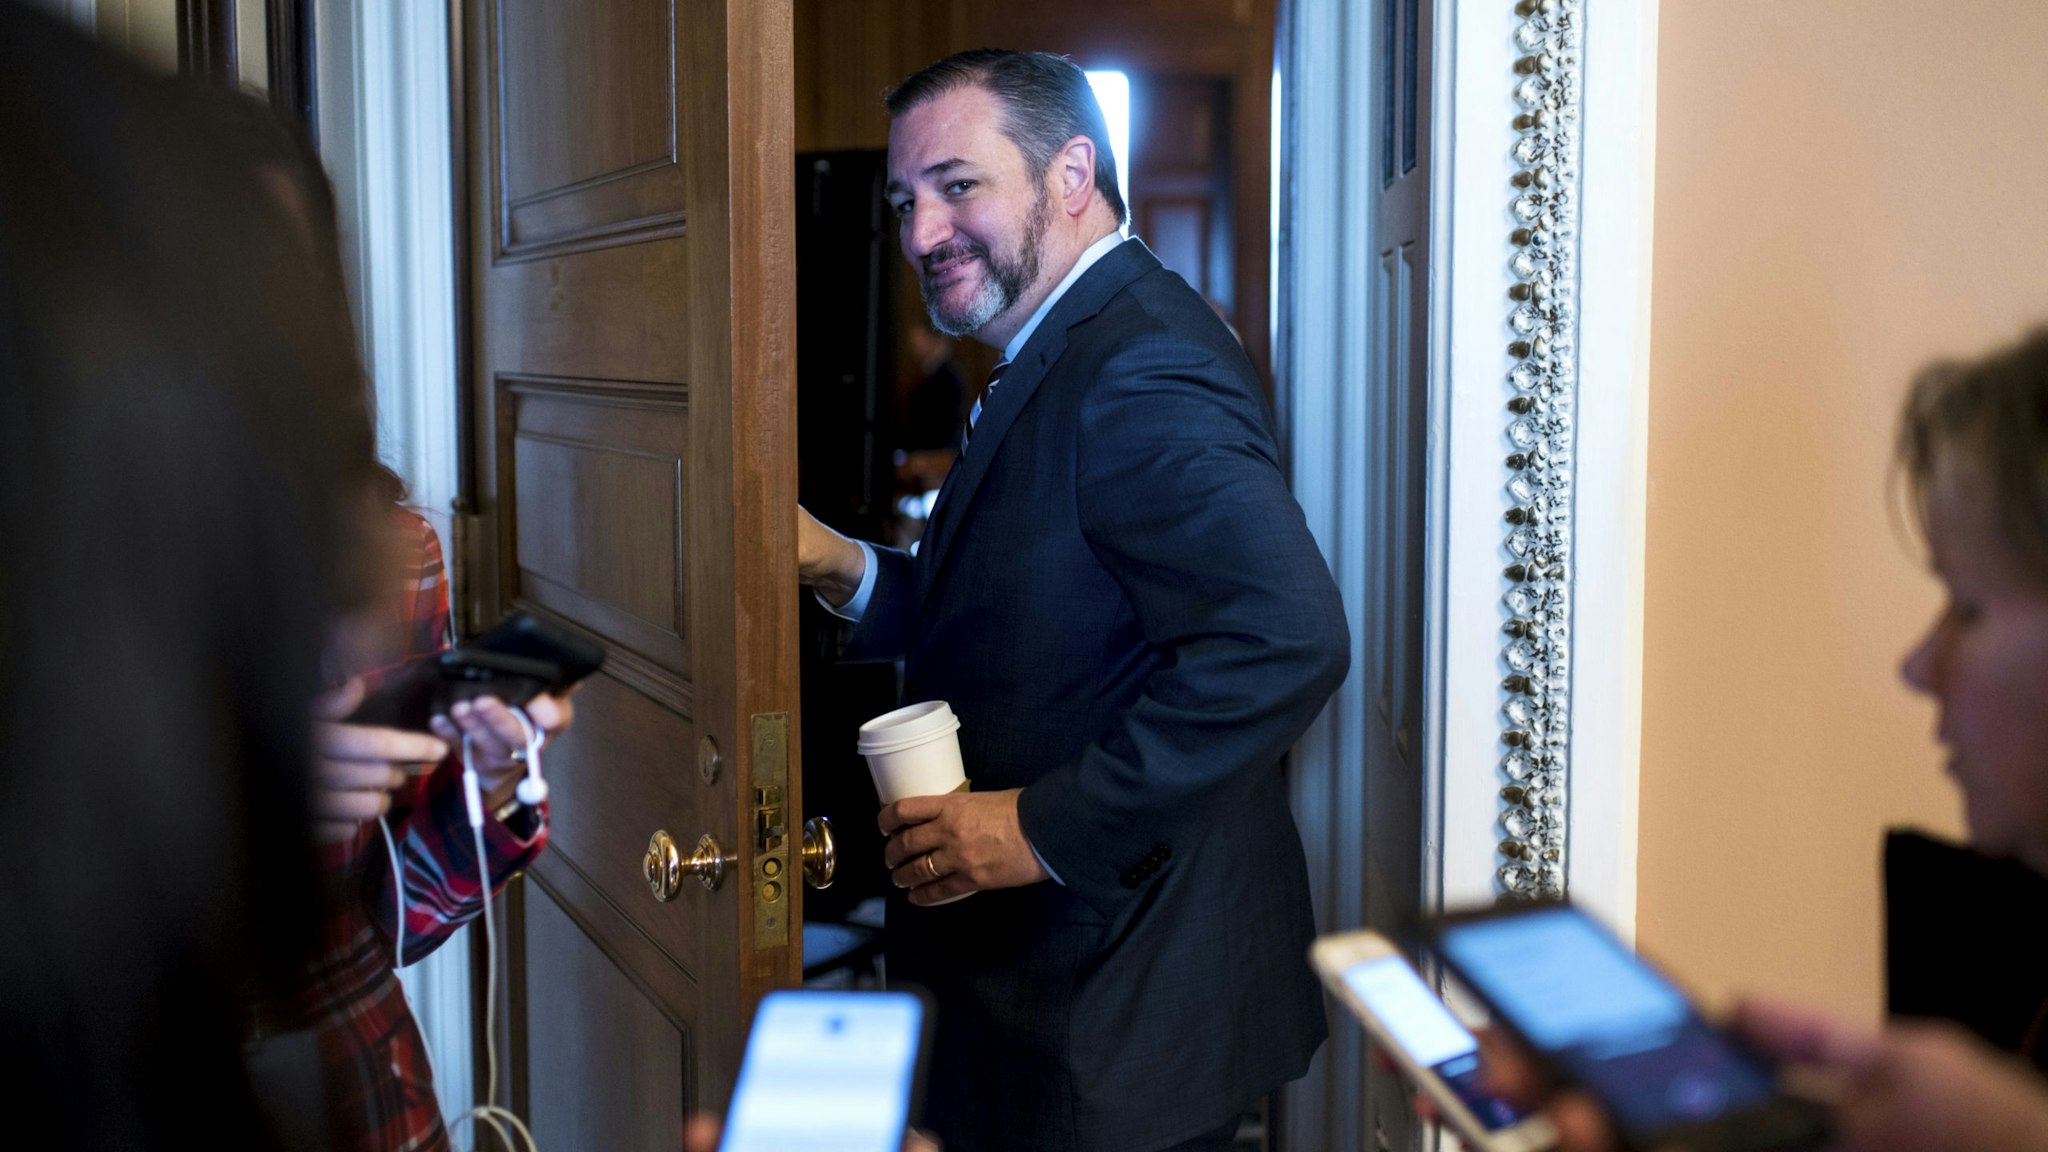 UNITED STATES - JANUARY 31: Sen. Ted Cruz, R-Texas, enters the Mansfield room for the Senate Republicans lunch in the Capitol before the start of the Senate impeachment trial proceedings on Friday, Jan. 31, 2020.